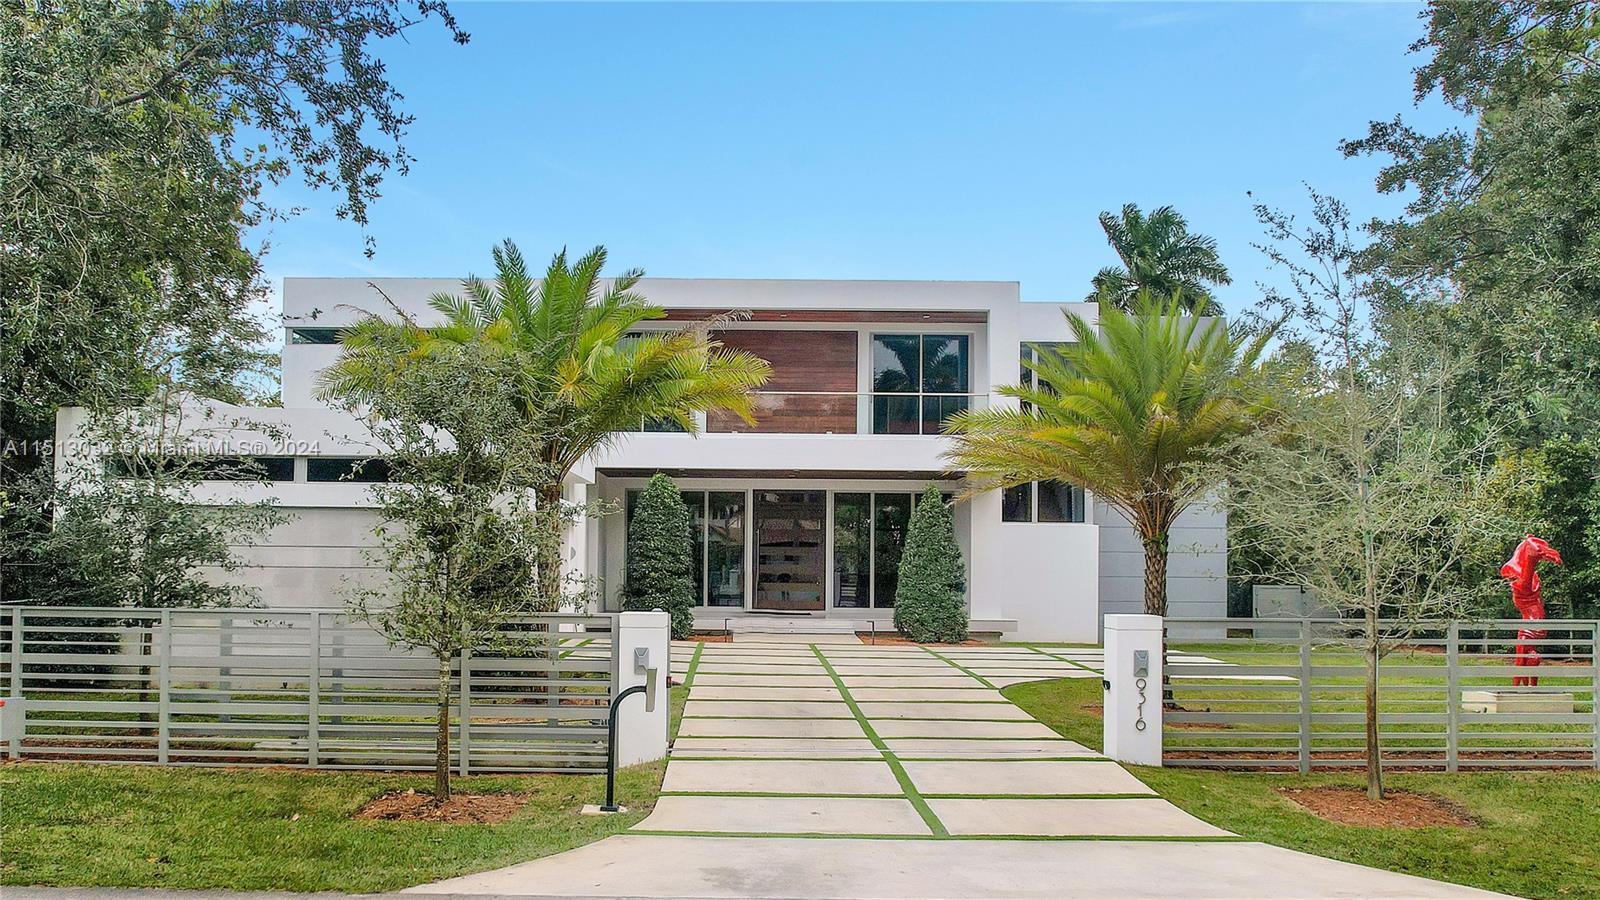 Prime North Pinecrest location on 3/4 acre! This exquisite high-end property, aprox 6,228 Sq.Ft (adjusted) is the epitome of luxury living in South Florida. Constructed in 2022, this modern home features top-of-the-line finishes that radiate sophistication. Includes a state-of-the-art swimming pool, equipped with a powerful turbine for counter-current swimming, perfect for fitness enthusiasts or those seeking relaxation! Additionally, the residence includes a dual electric vehicle charging setup, marble floors, sub-zero/wolf appliances, RH chandeliers, advanced high-definition Lutron sound system provides an unparalleled auditory experience, projector with retractable cinema screen, custom cabinets and closets and much more. Near shopping and dining. **Red sculpture is not included.